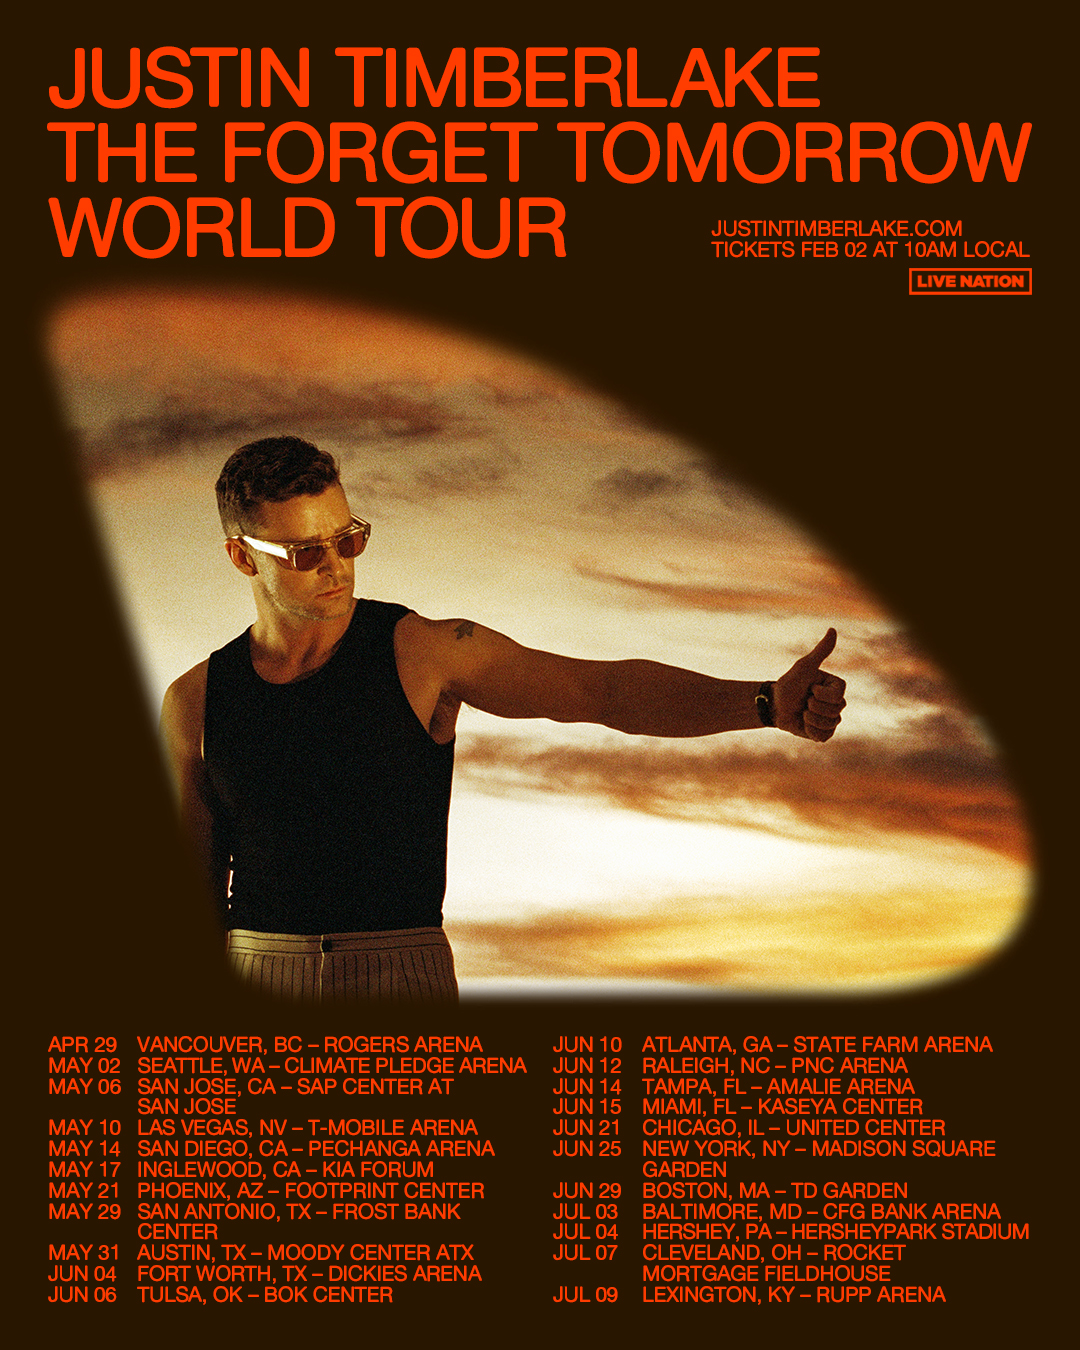 Justin Timberlake - The Forget Tomorrow World Tour en Moody Center ATX Tickets